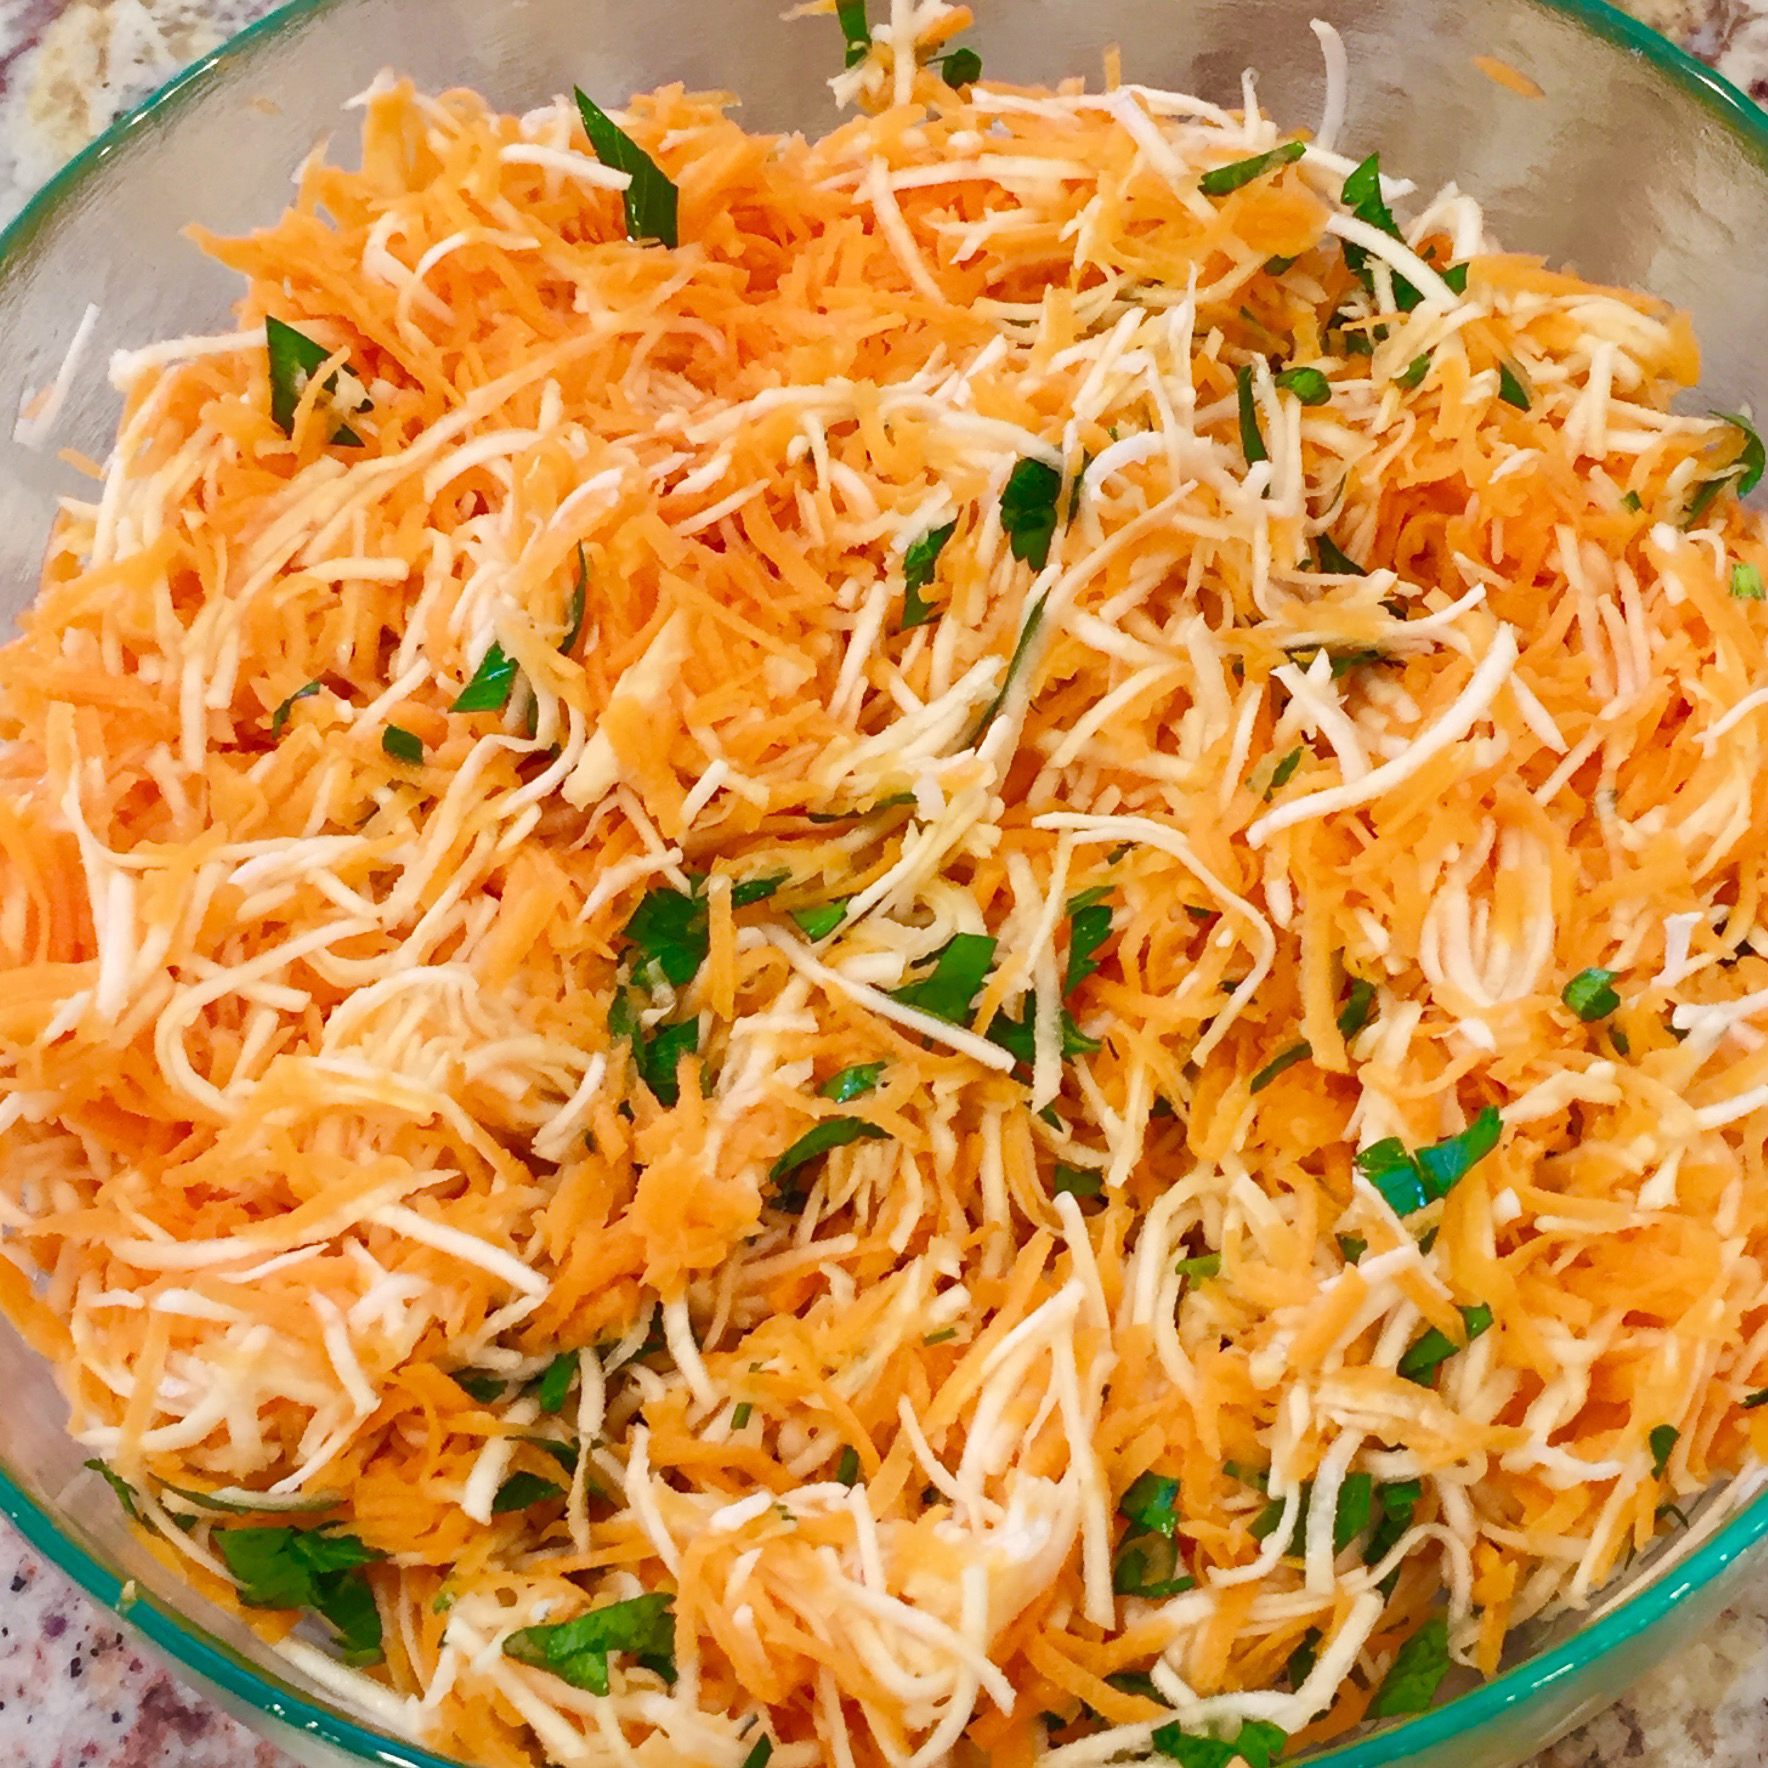 Carrot and Celery Root Salad